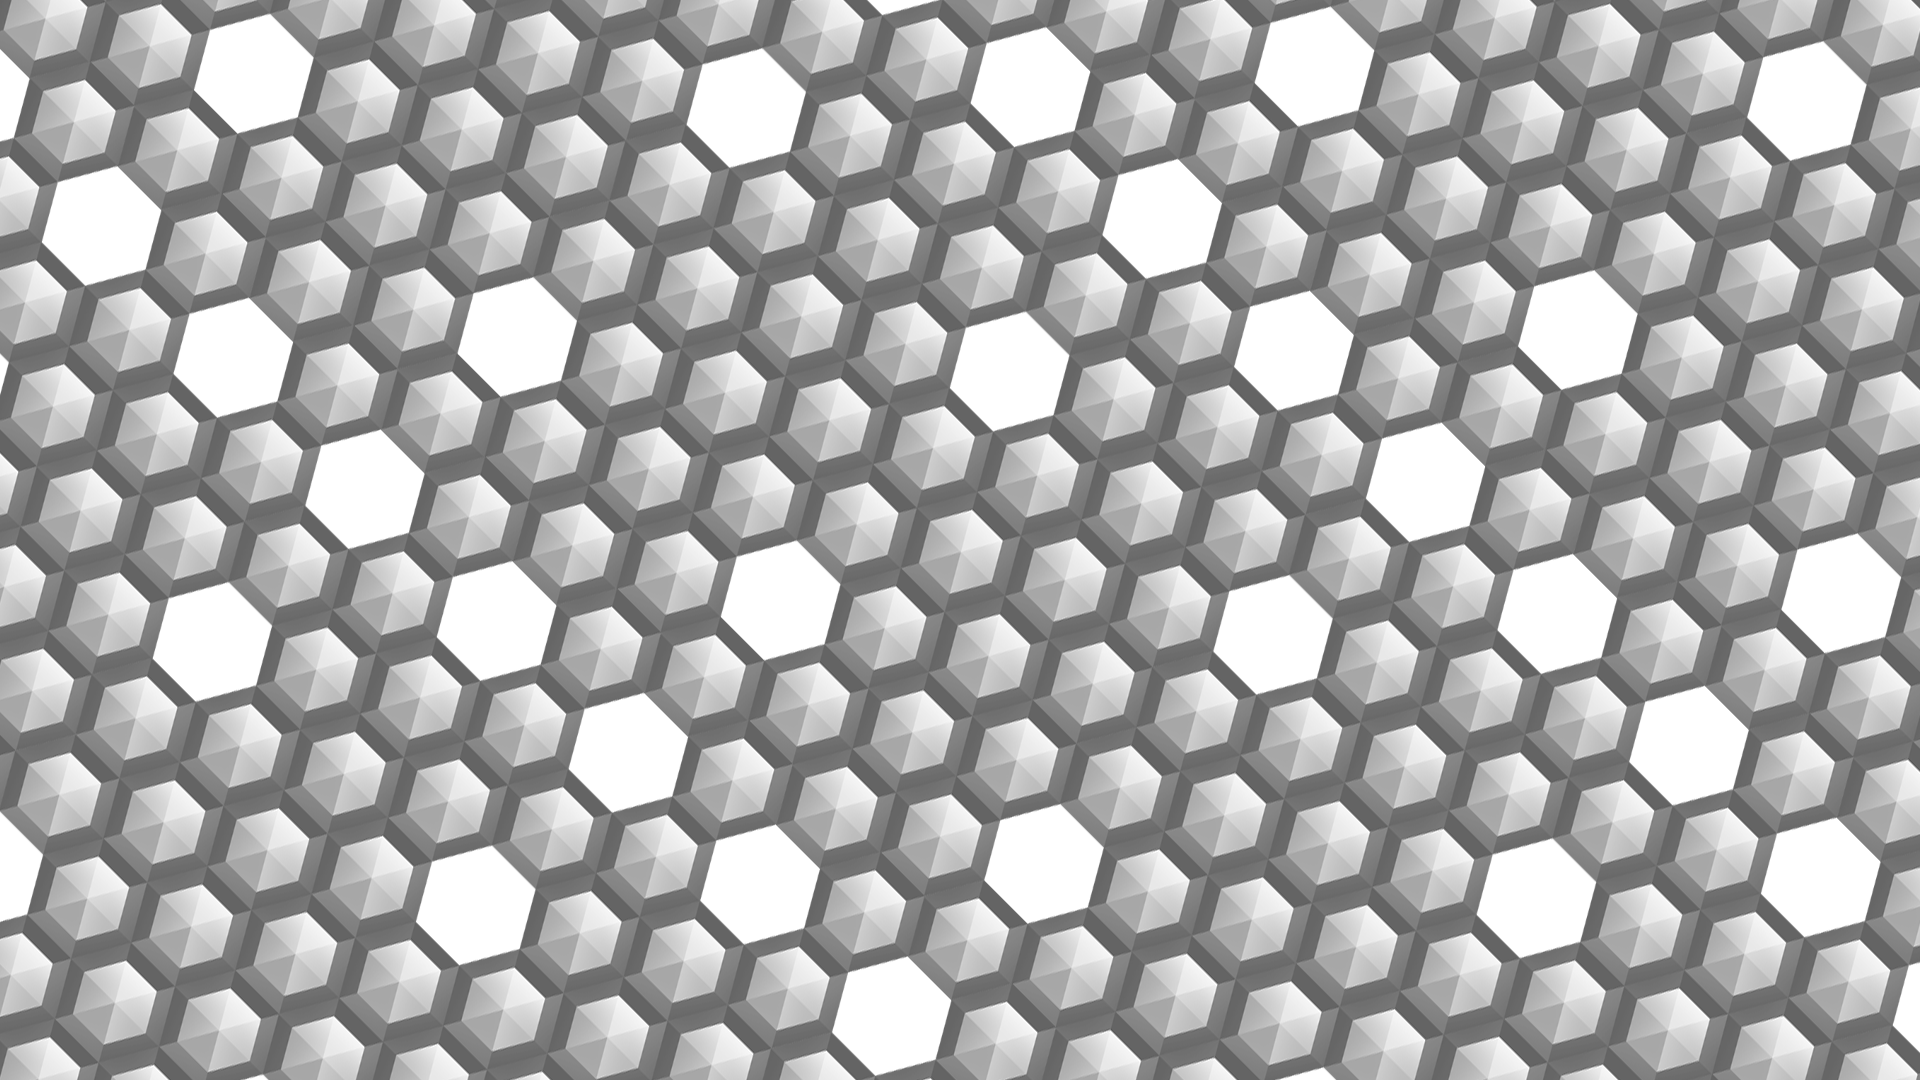 Hexagon Tile Cells Bright Simple Geometry 1920x1080